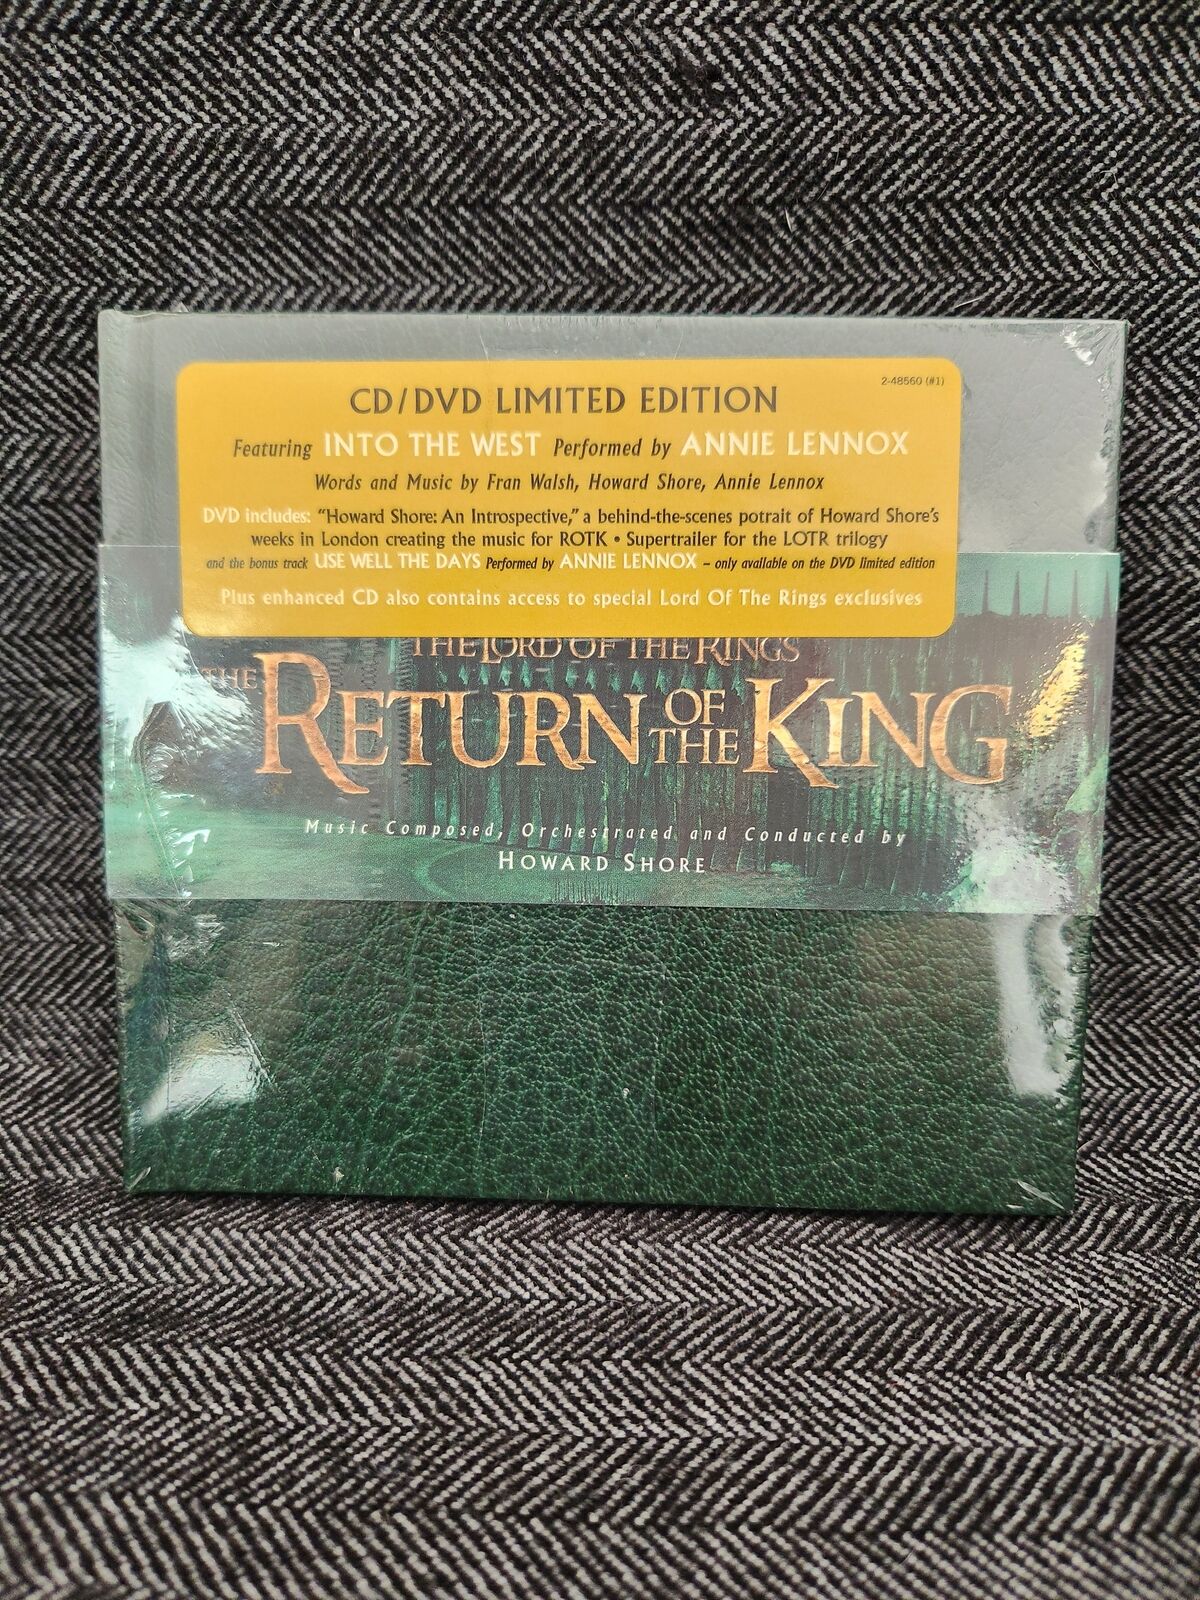 2003 The Lord of the Rings: The Return of the King CD/DVD Limited Edition Sound